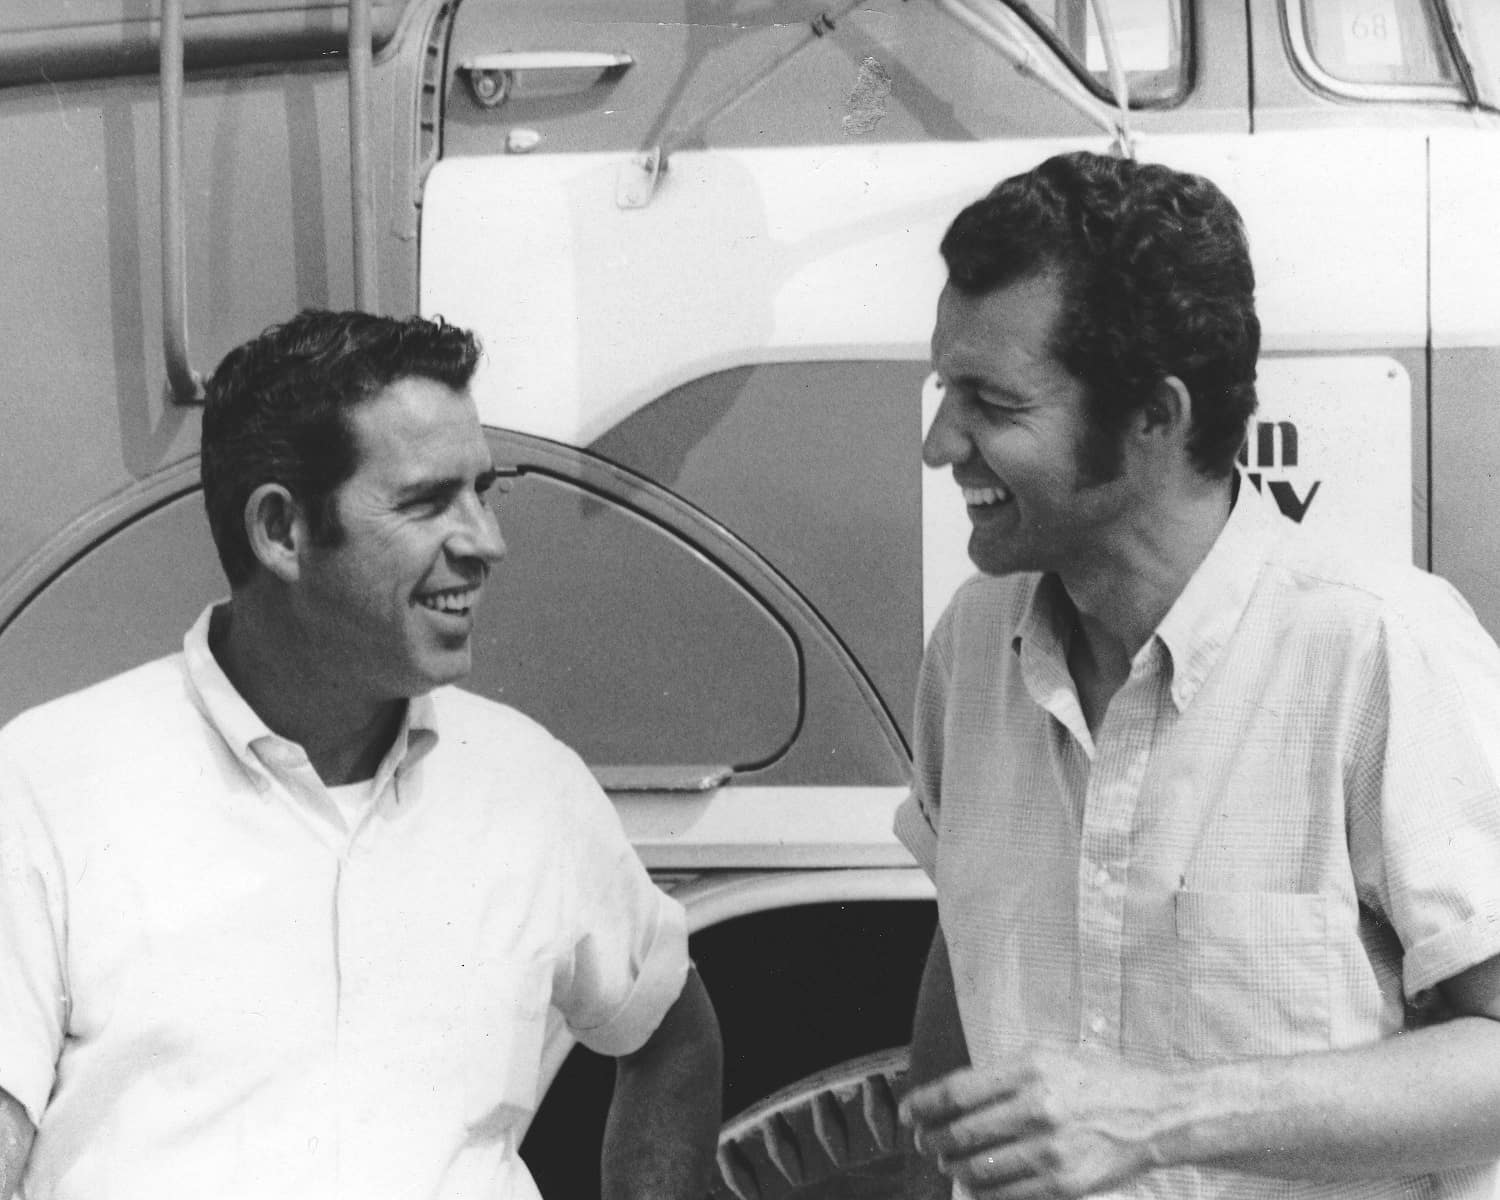 David Pearson and Richard Petty in an undated photo.